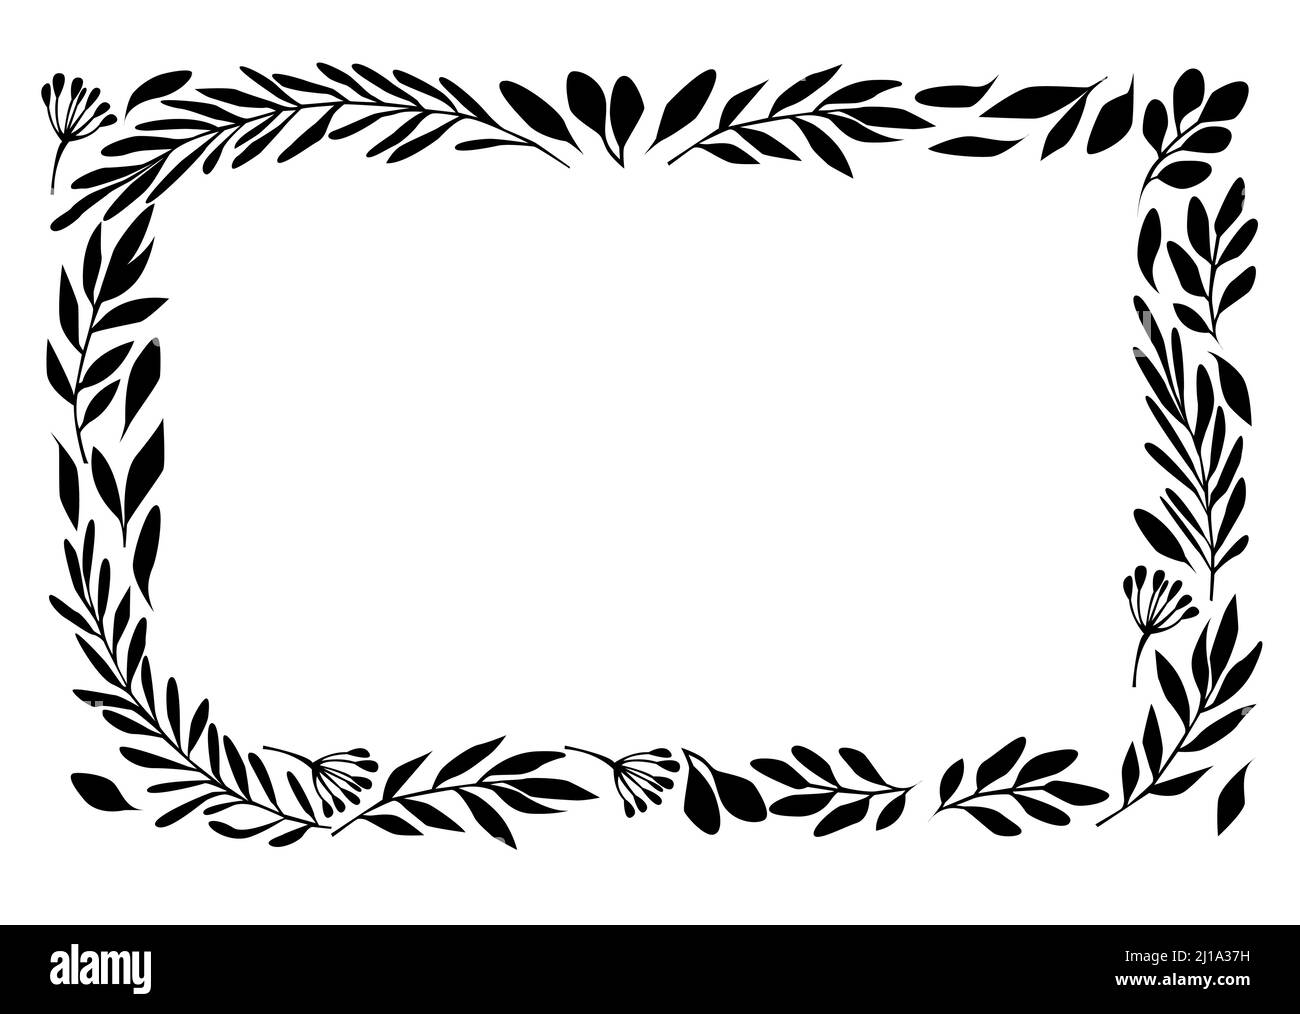 Floral leafy rectangle border design isolated on white background - vector illustration Stock Vector